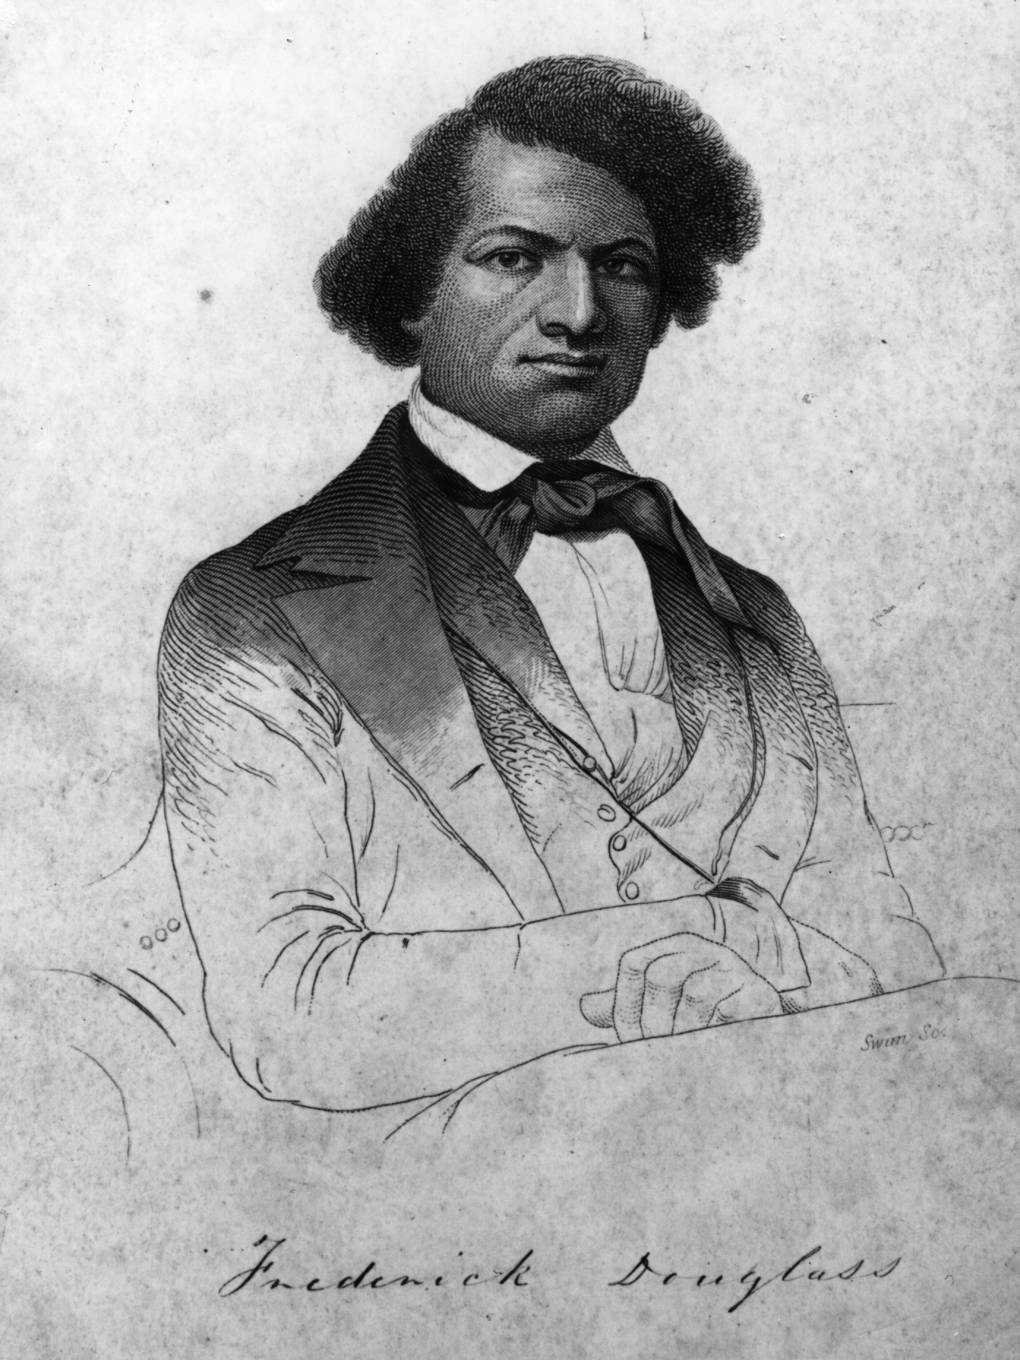 As a young enslaved boy in Baltimore, Frederick Douglass bartered pieces of bread for lessons in literacy. His teachers were white neighborhood kids, who could read and write but had no food. At 20, he ran away to New York and started his new life as an anti-slavery orator and activist.